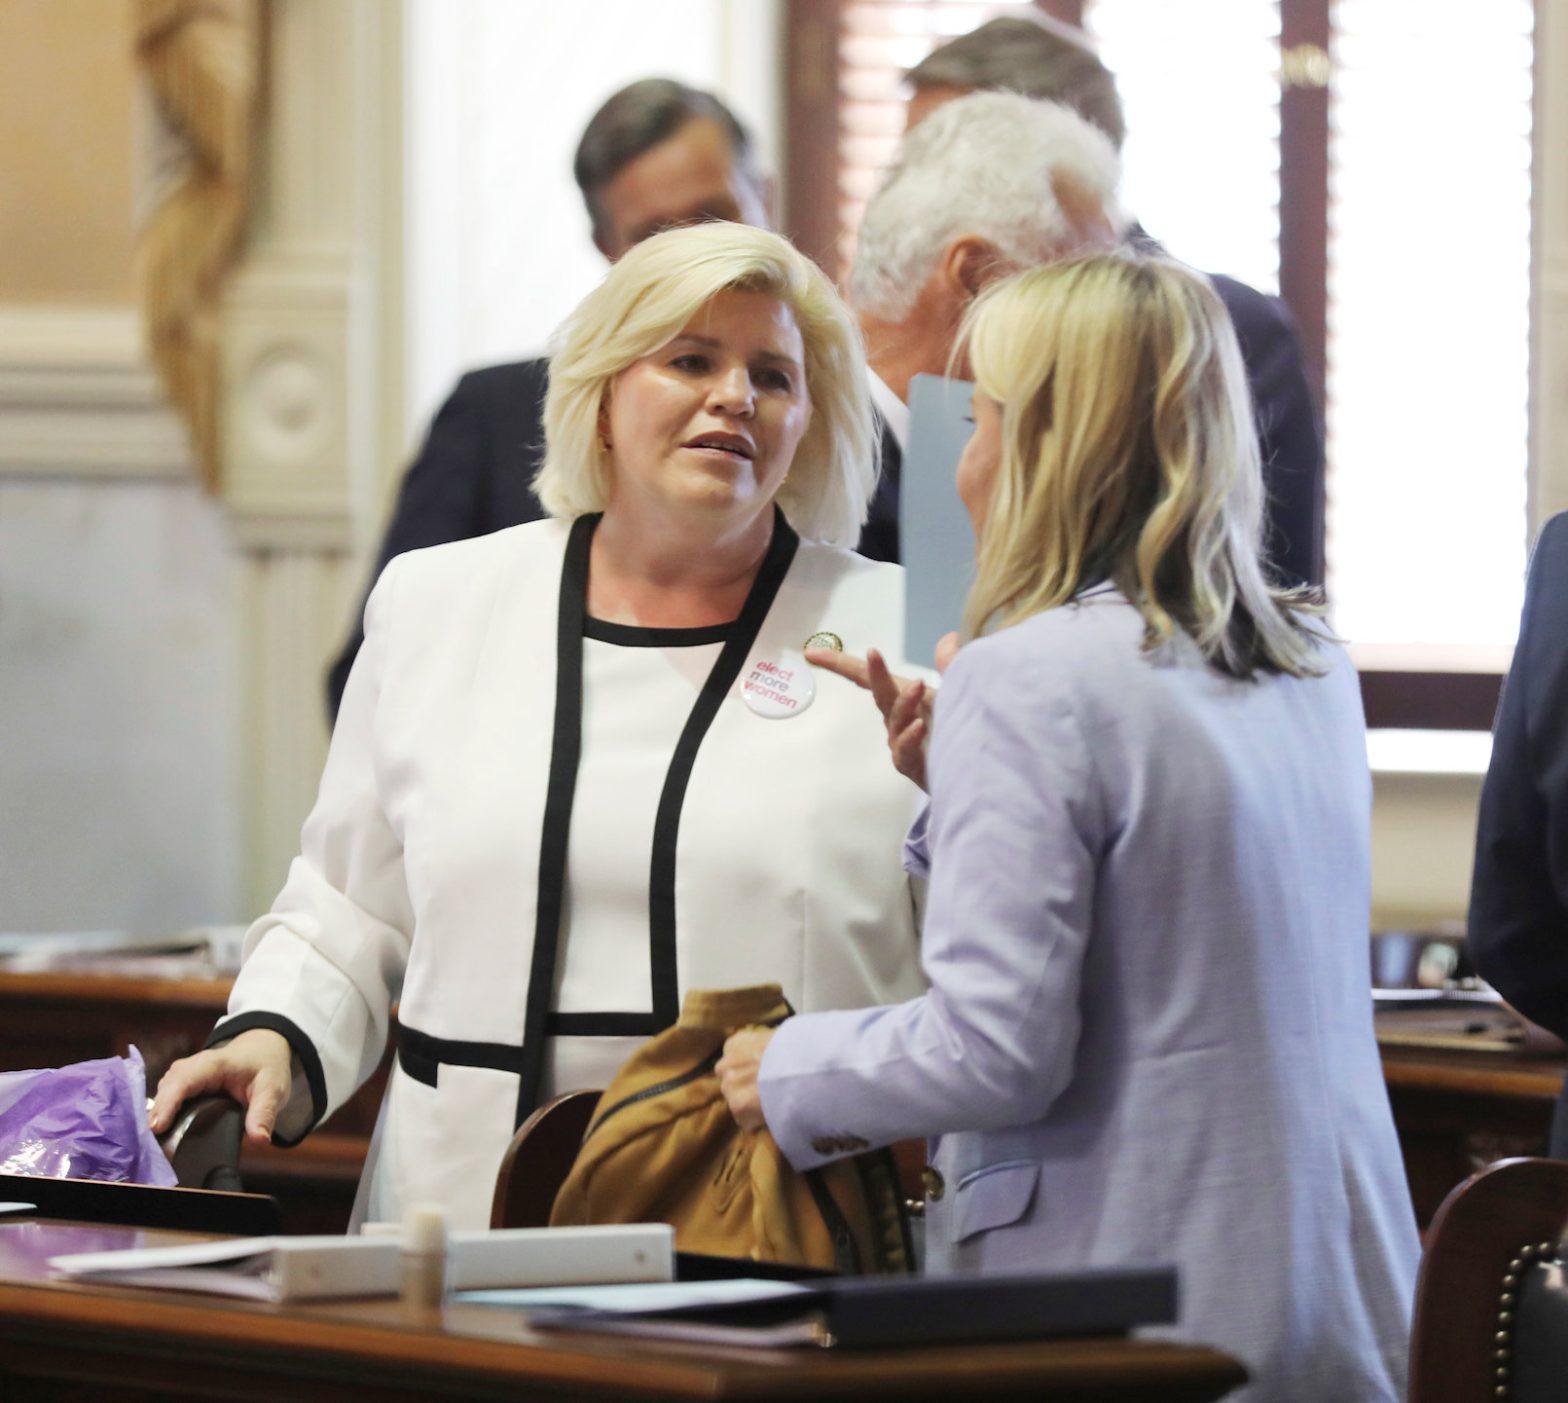 South Carolina’s Only Women Senators to Resist New Abortion Restrictions Up for Debate